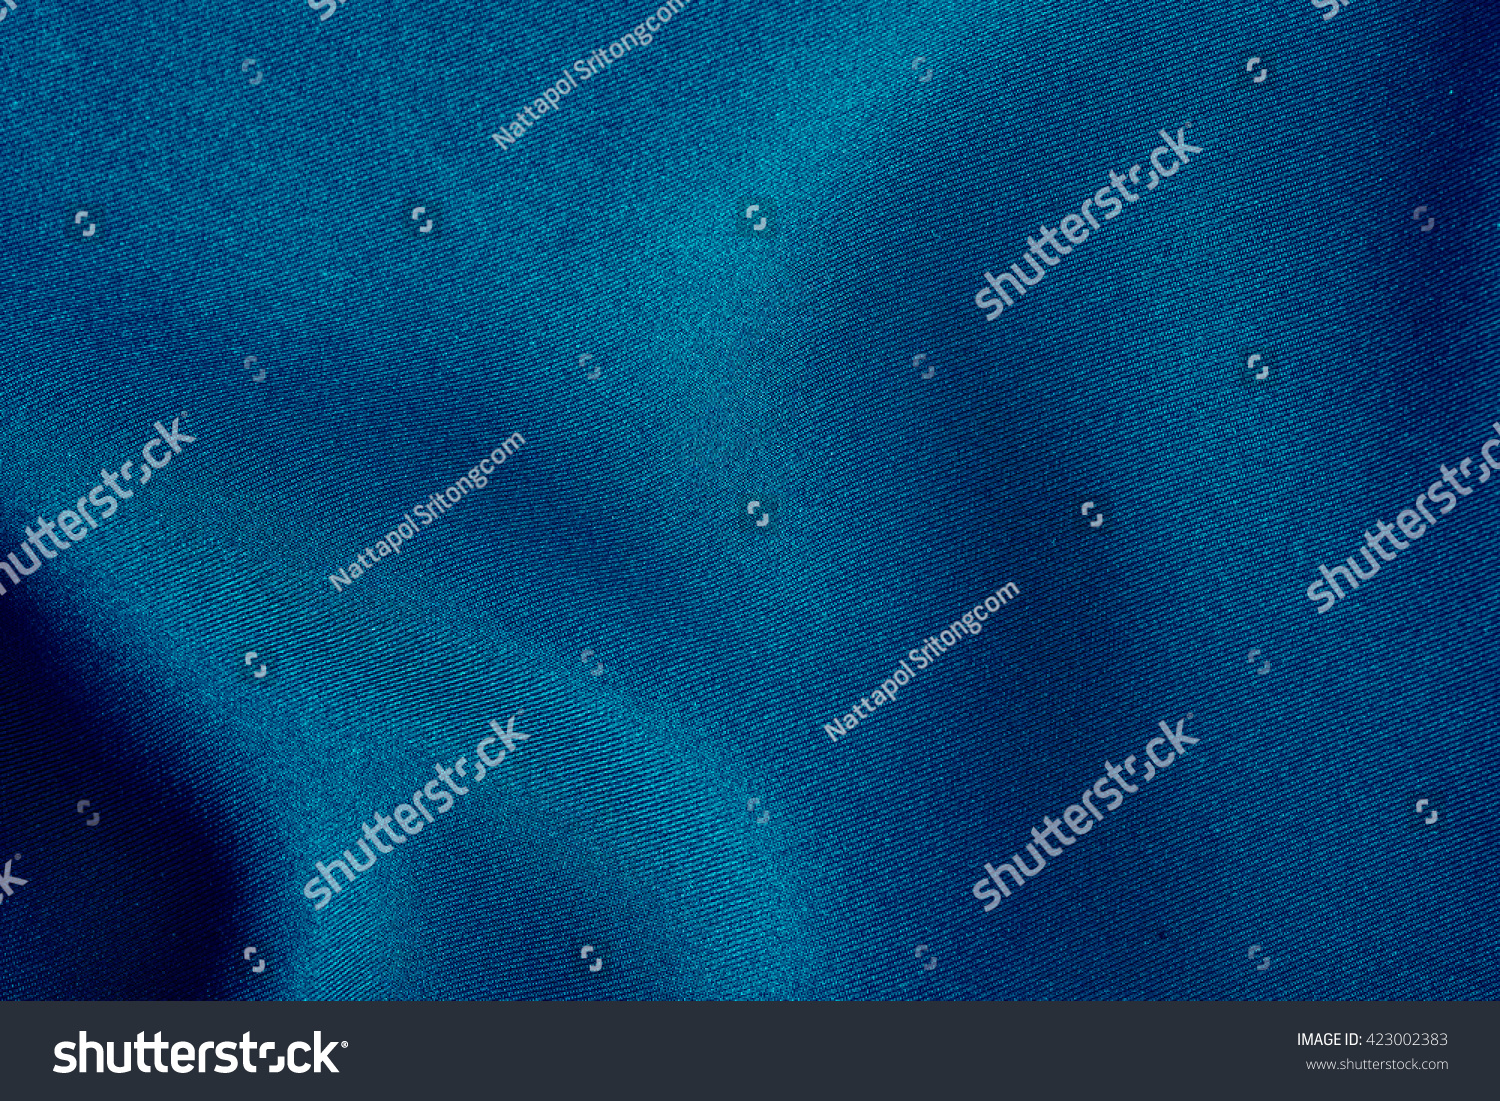 blue fabric cloth background texture #423002383